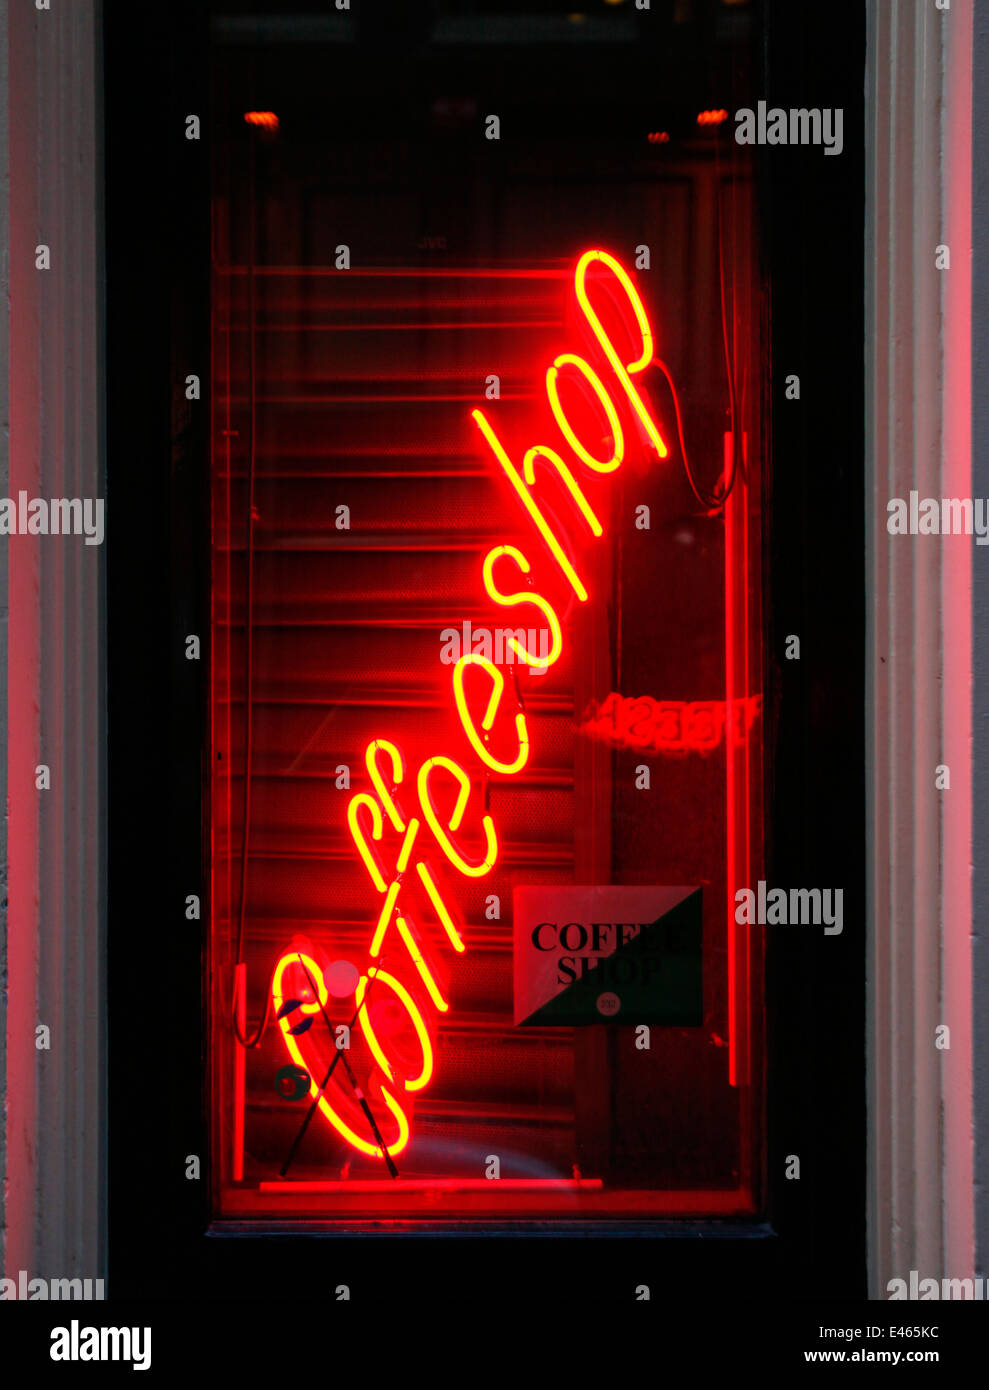 coffeshop window amsterdam, holland, a 'coffeshop' where drugs are available Stock Photo